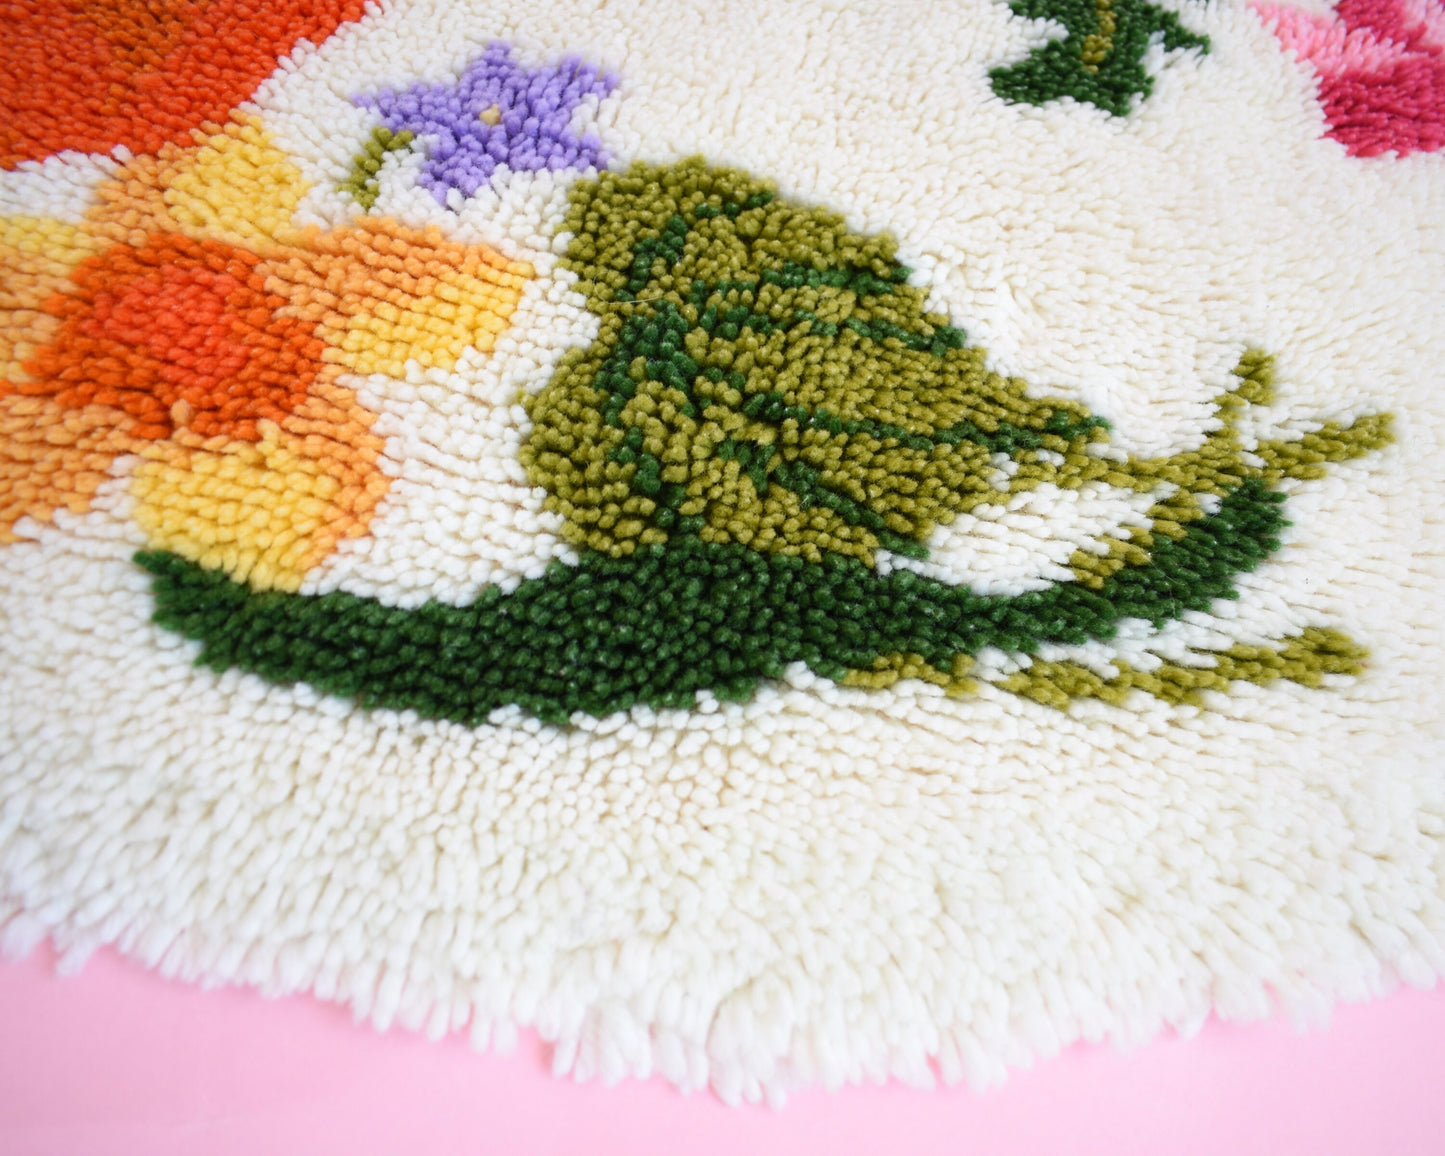 Close up view of the shaggy yarn and floral motif